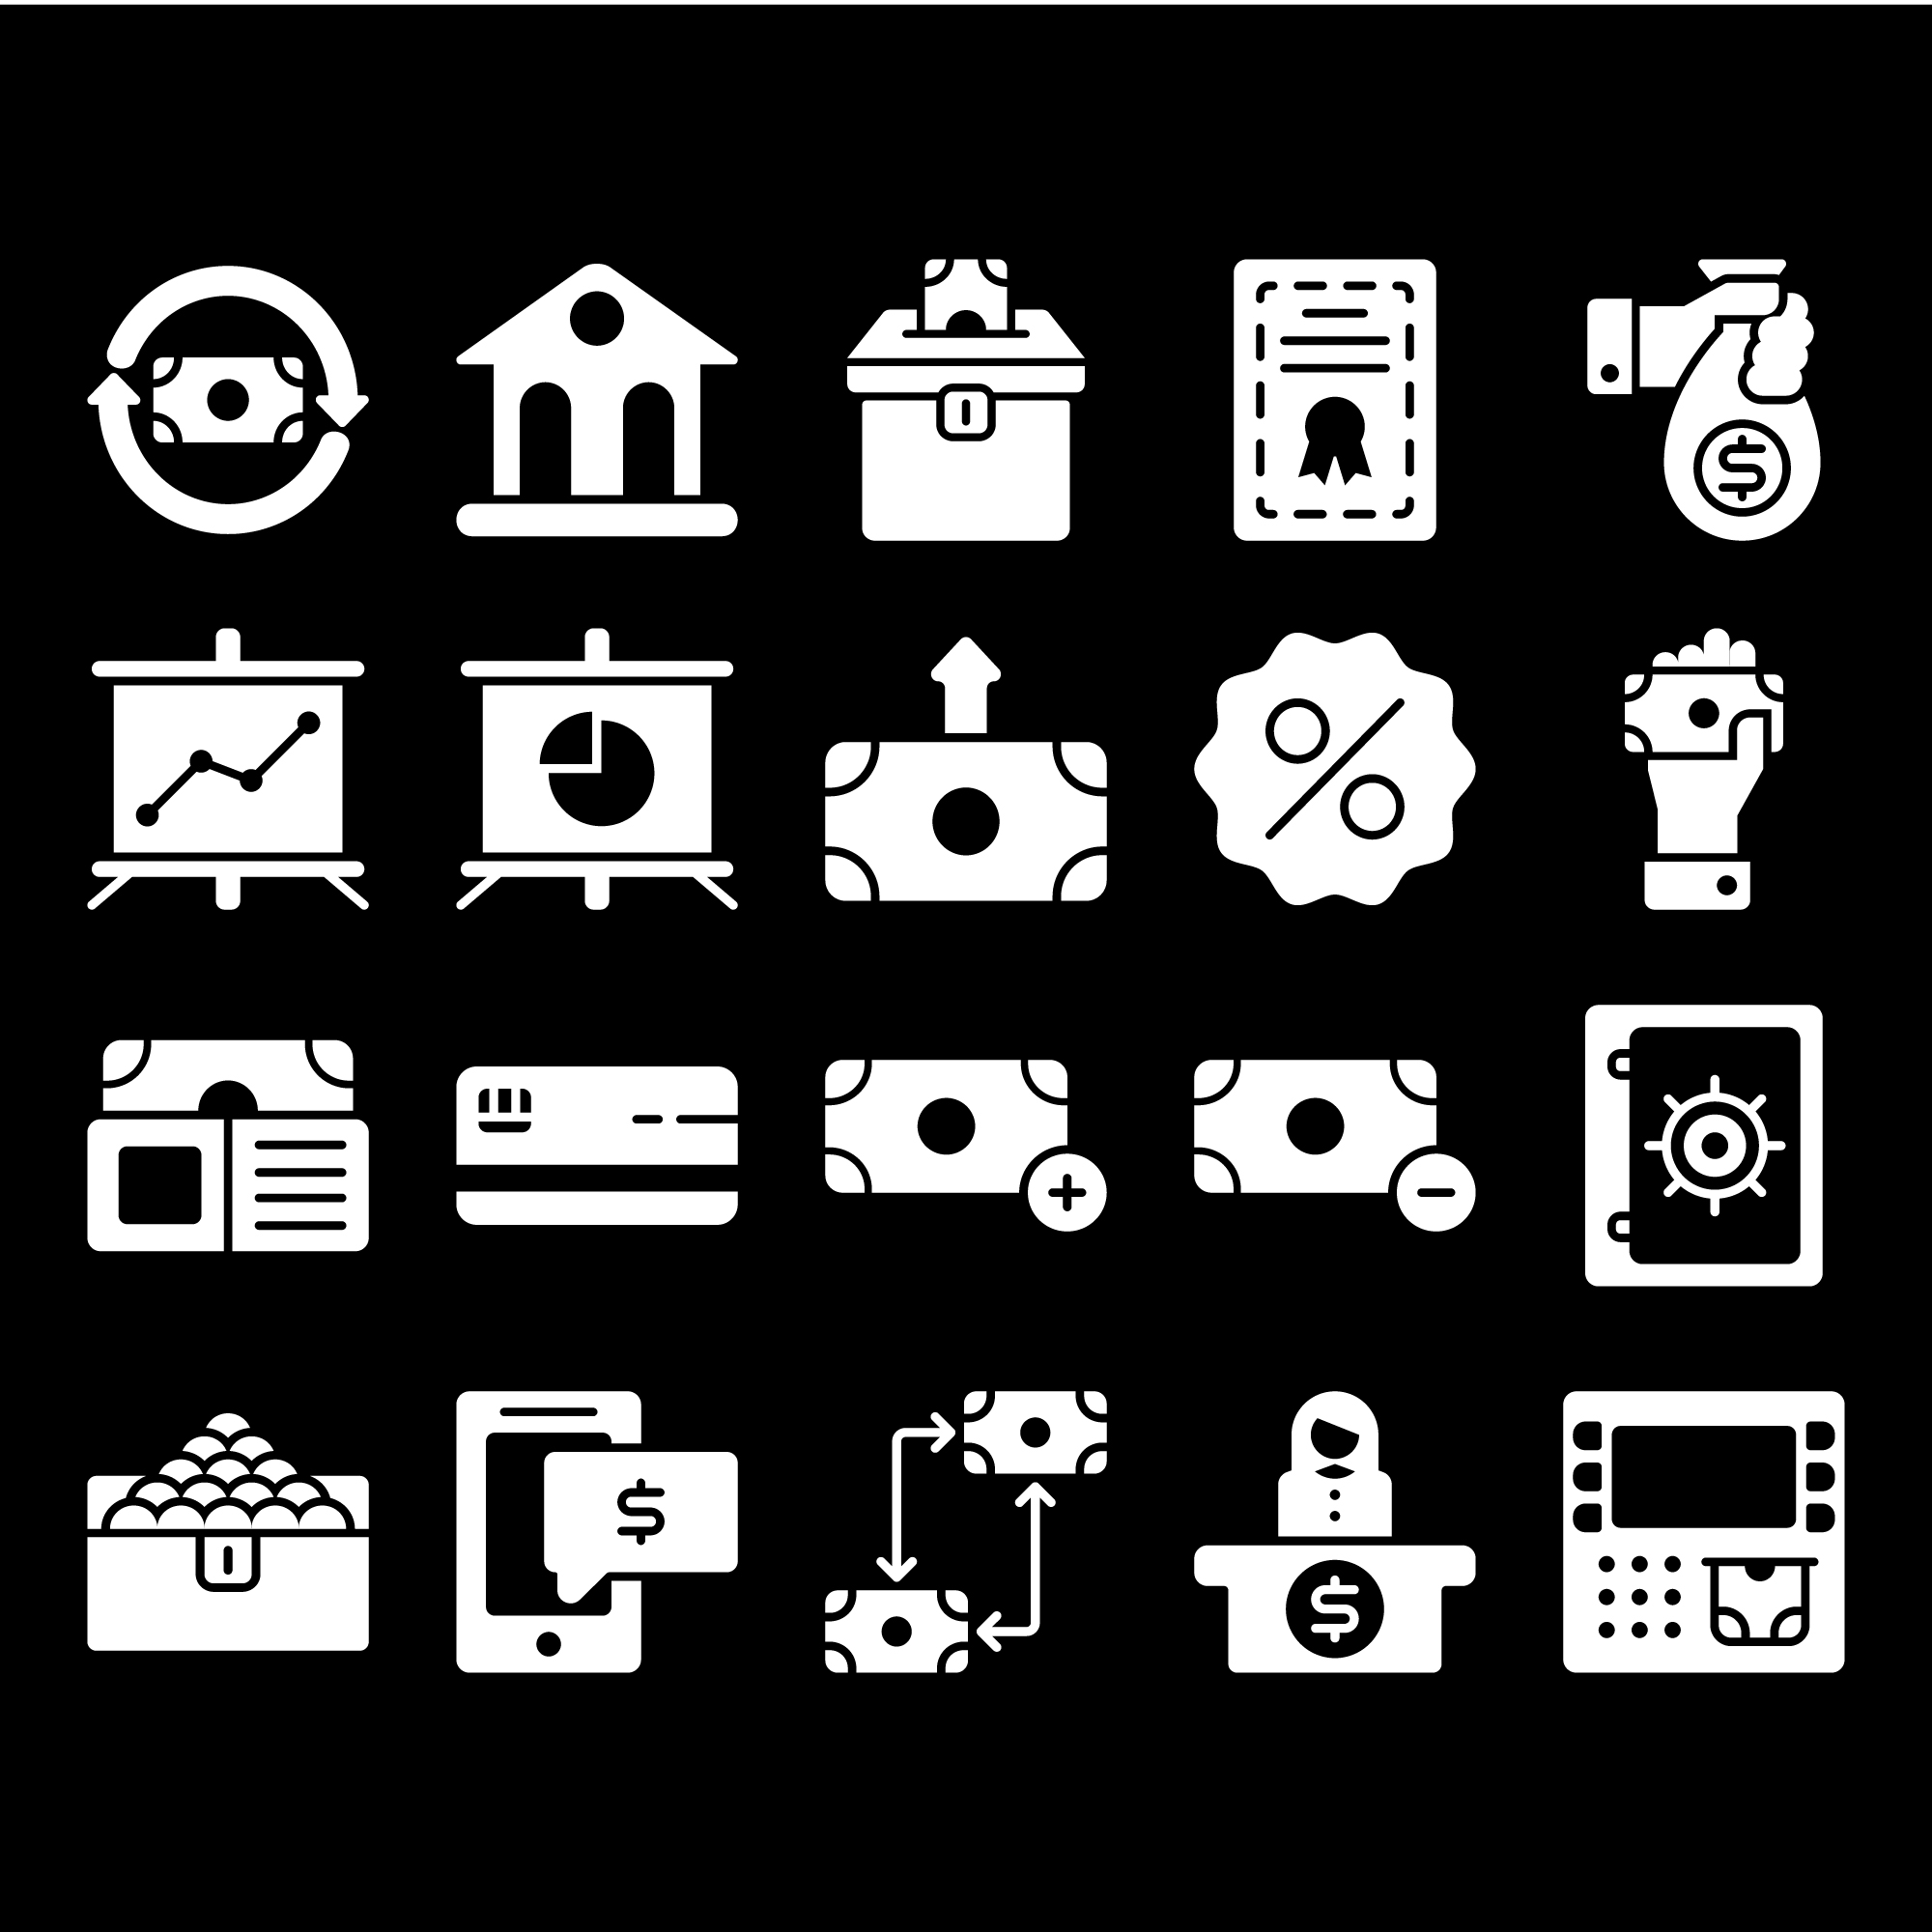 Black and White Money Icons cover image.